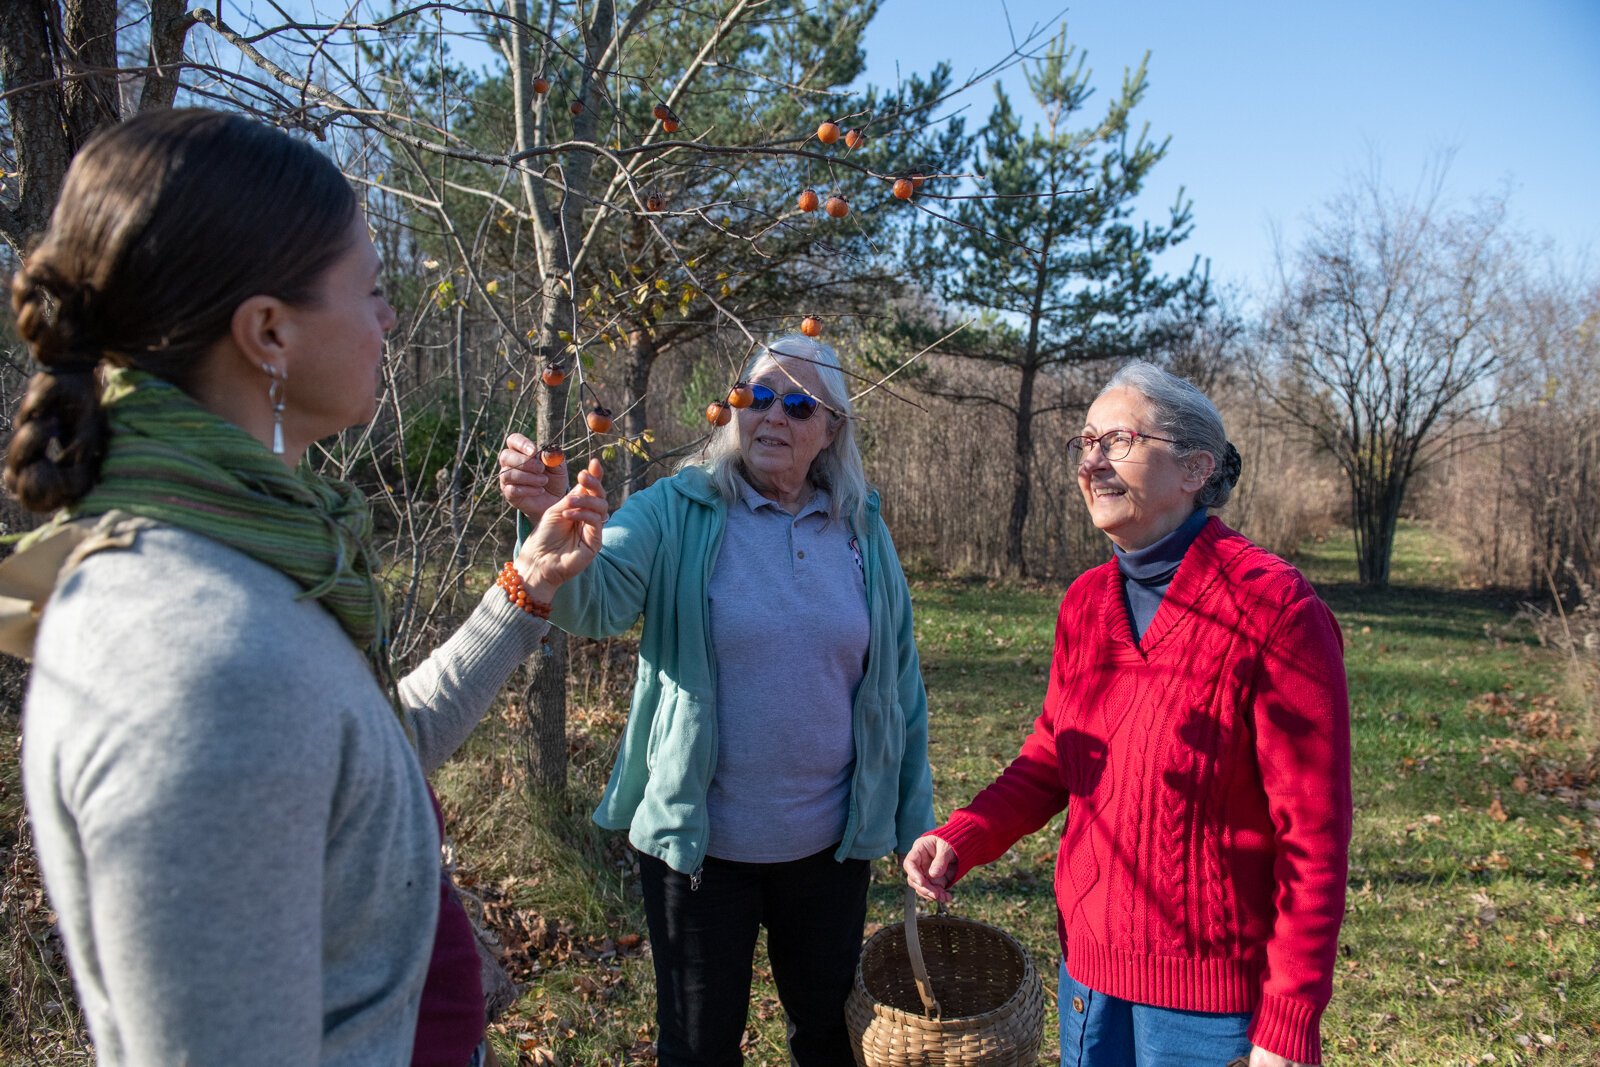 From right are Diane Hunter, Dani Tippmann, and Claudia Hedeen all of the Miami Tribe of Oklahoma forage persimmon, an edible fruit off of a tree, on Miami tribal property in Fort Wayne